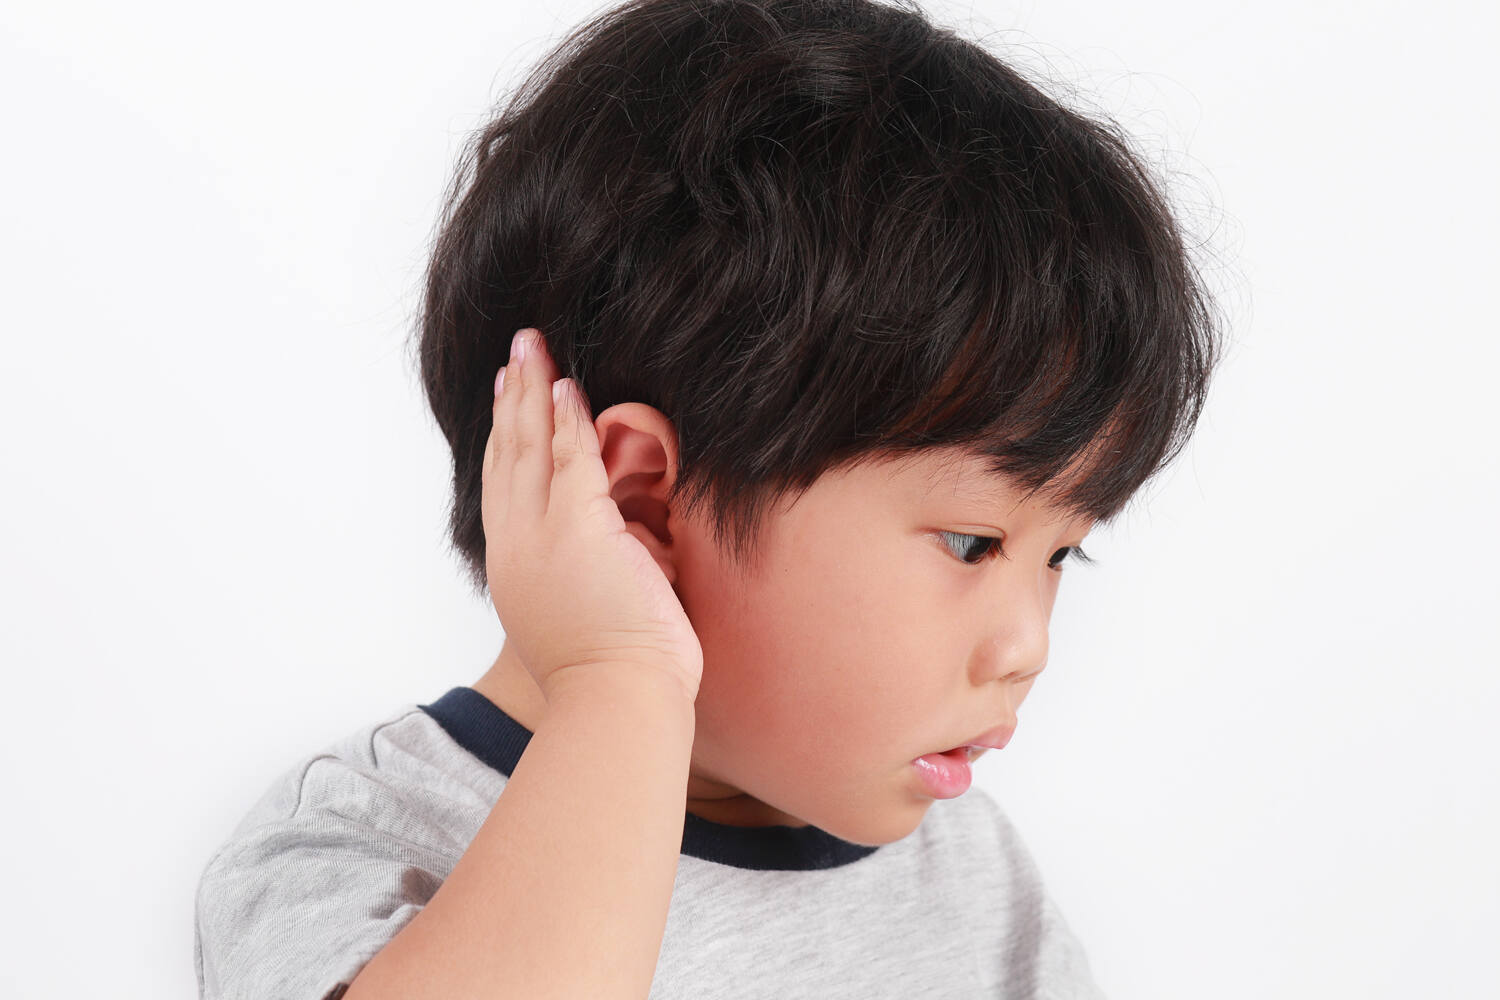 Not responding to sound  is one of the signs of hearing loss